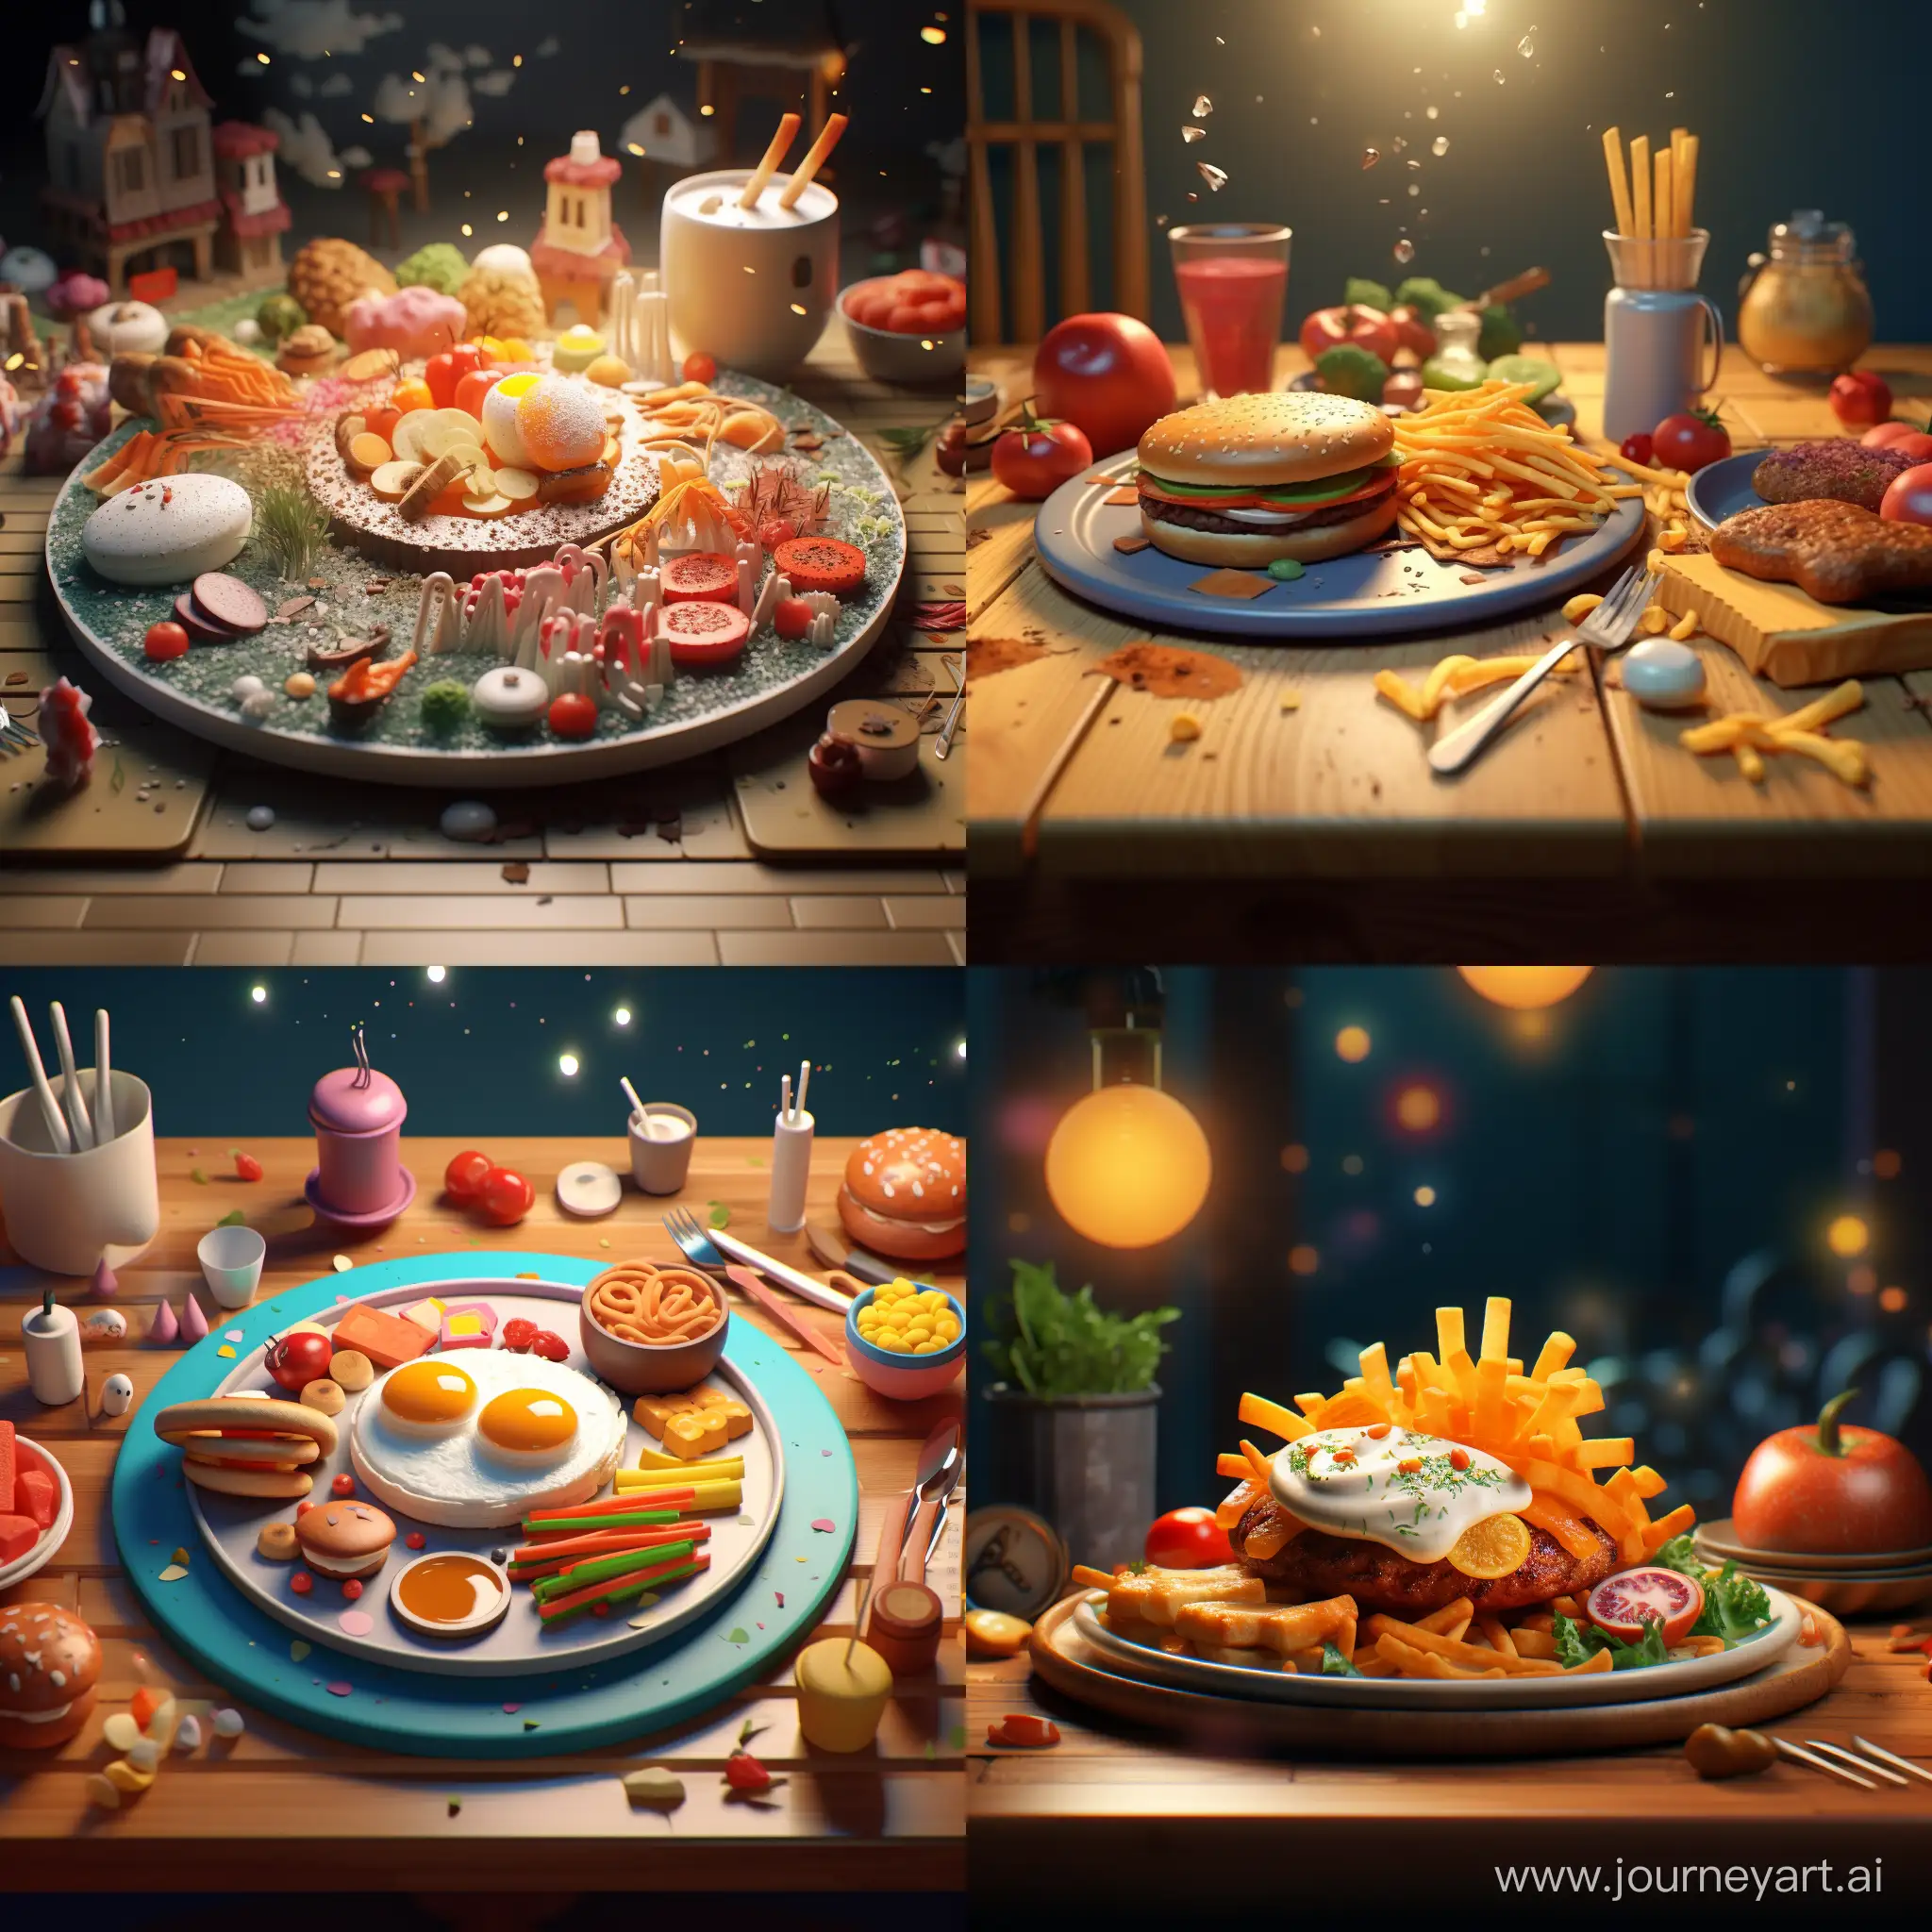 Bountiful-Feast-on-a-Grand-Platter-3D-Animation-Delight